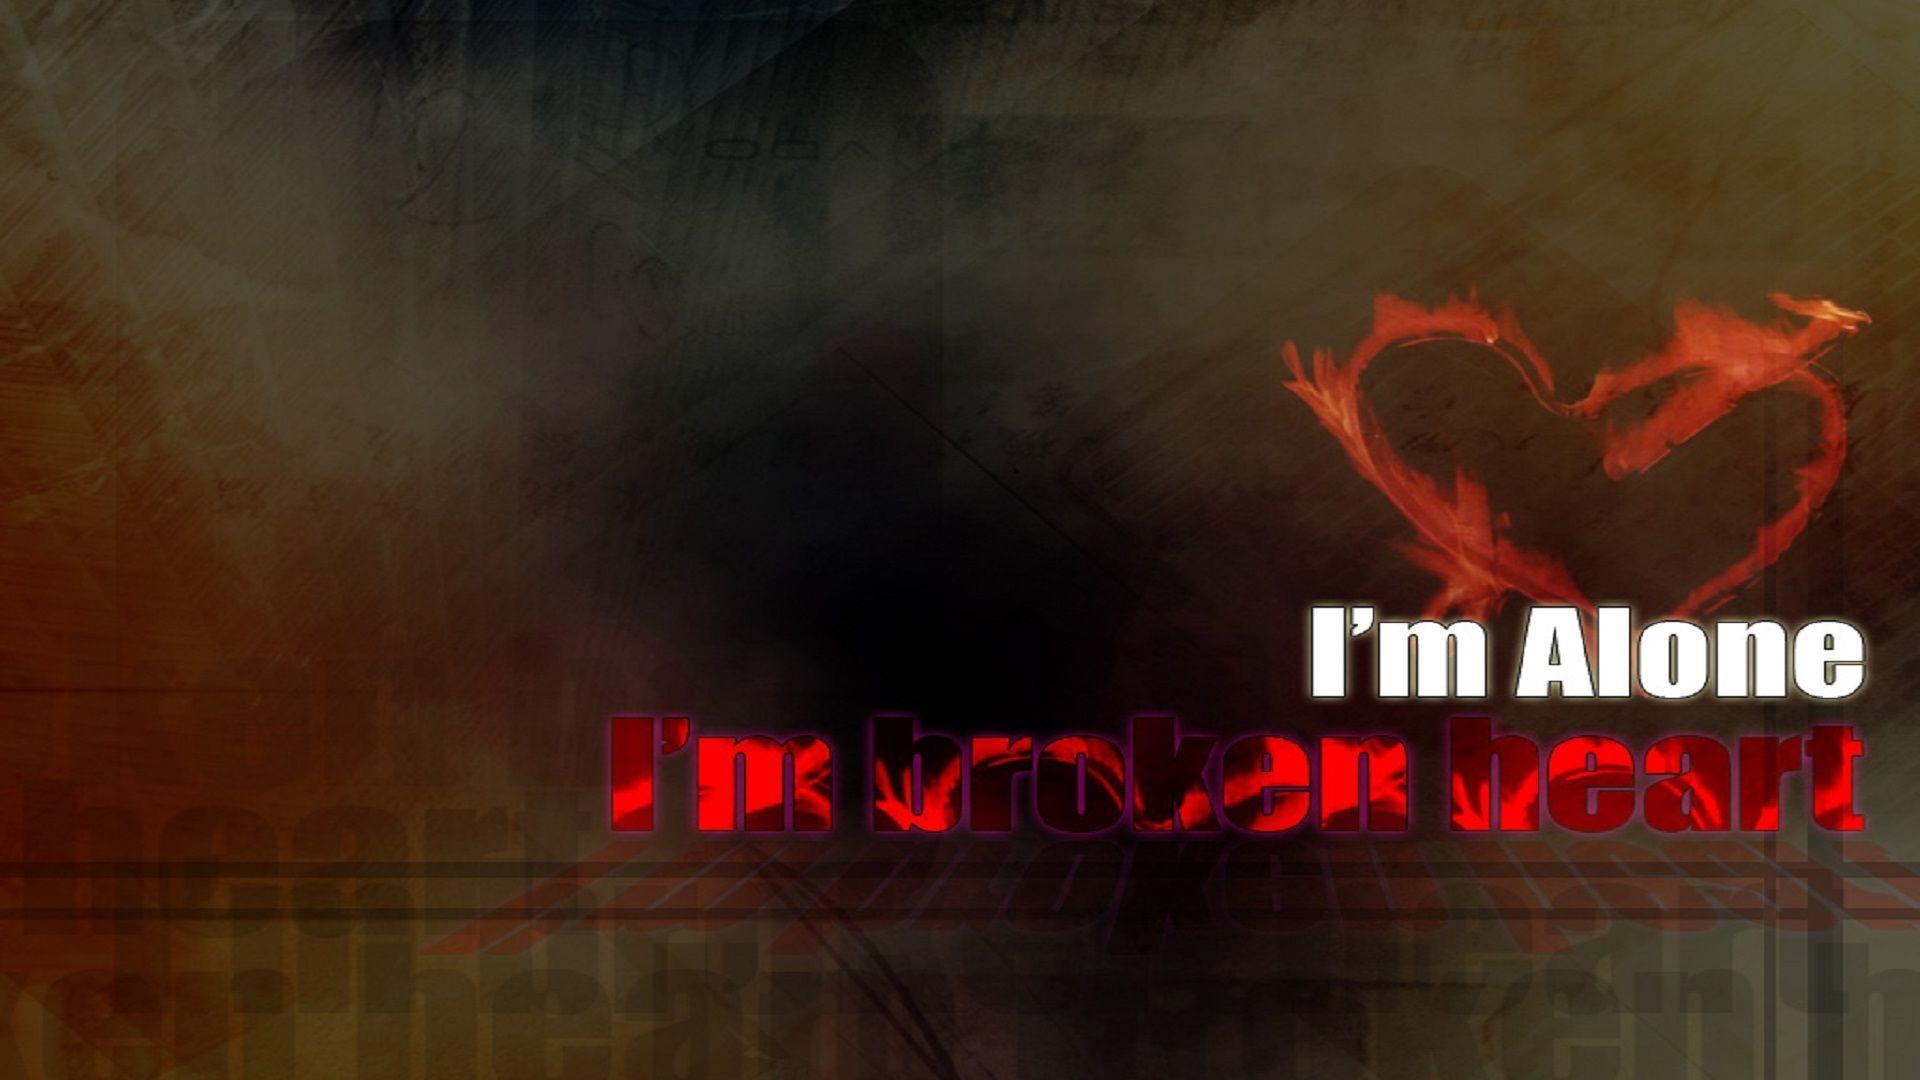 I am alone wallpapers hd